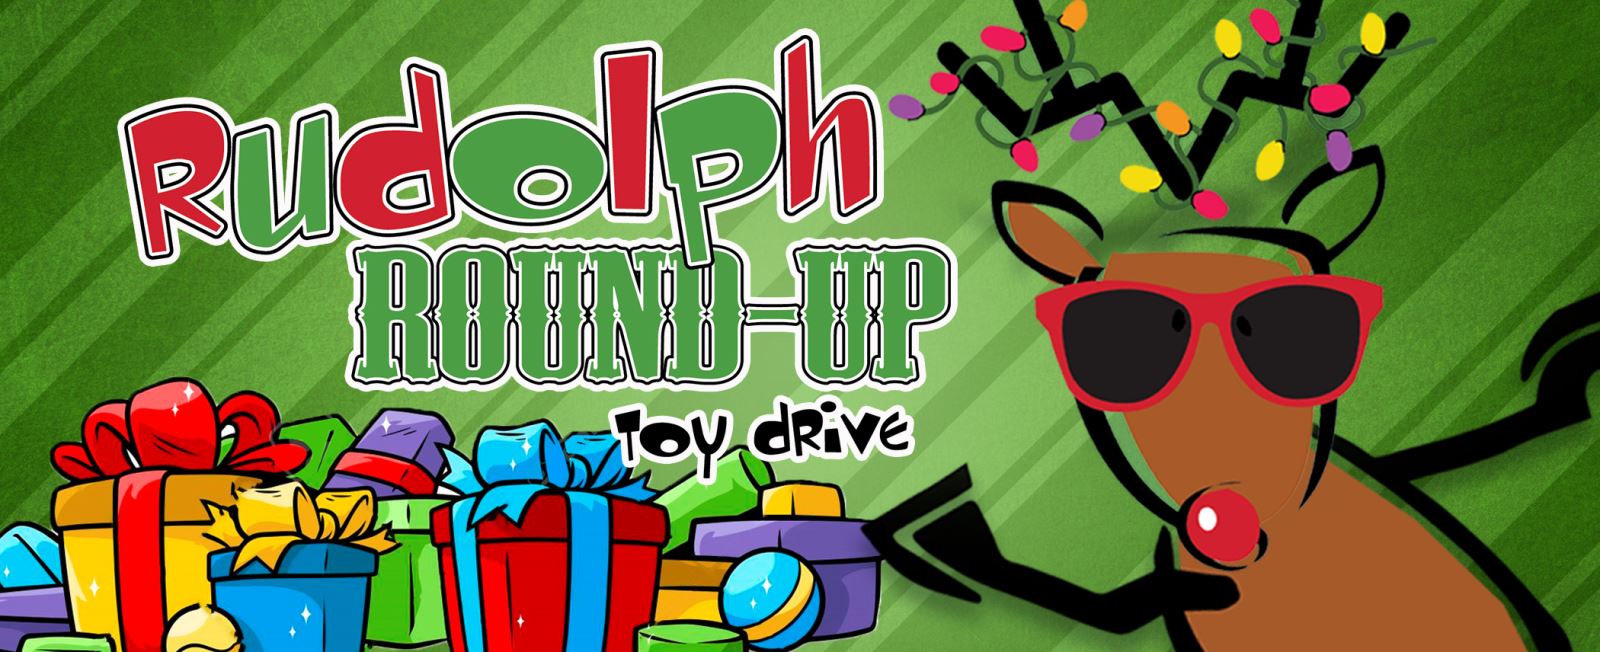 Rudolph round up holiday toy drive logo banner